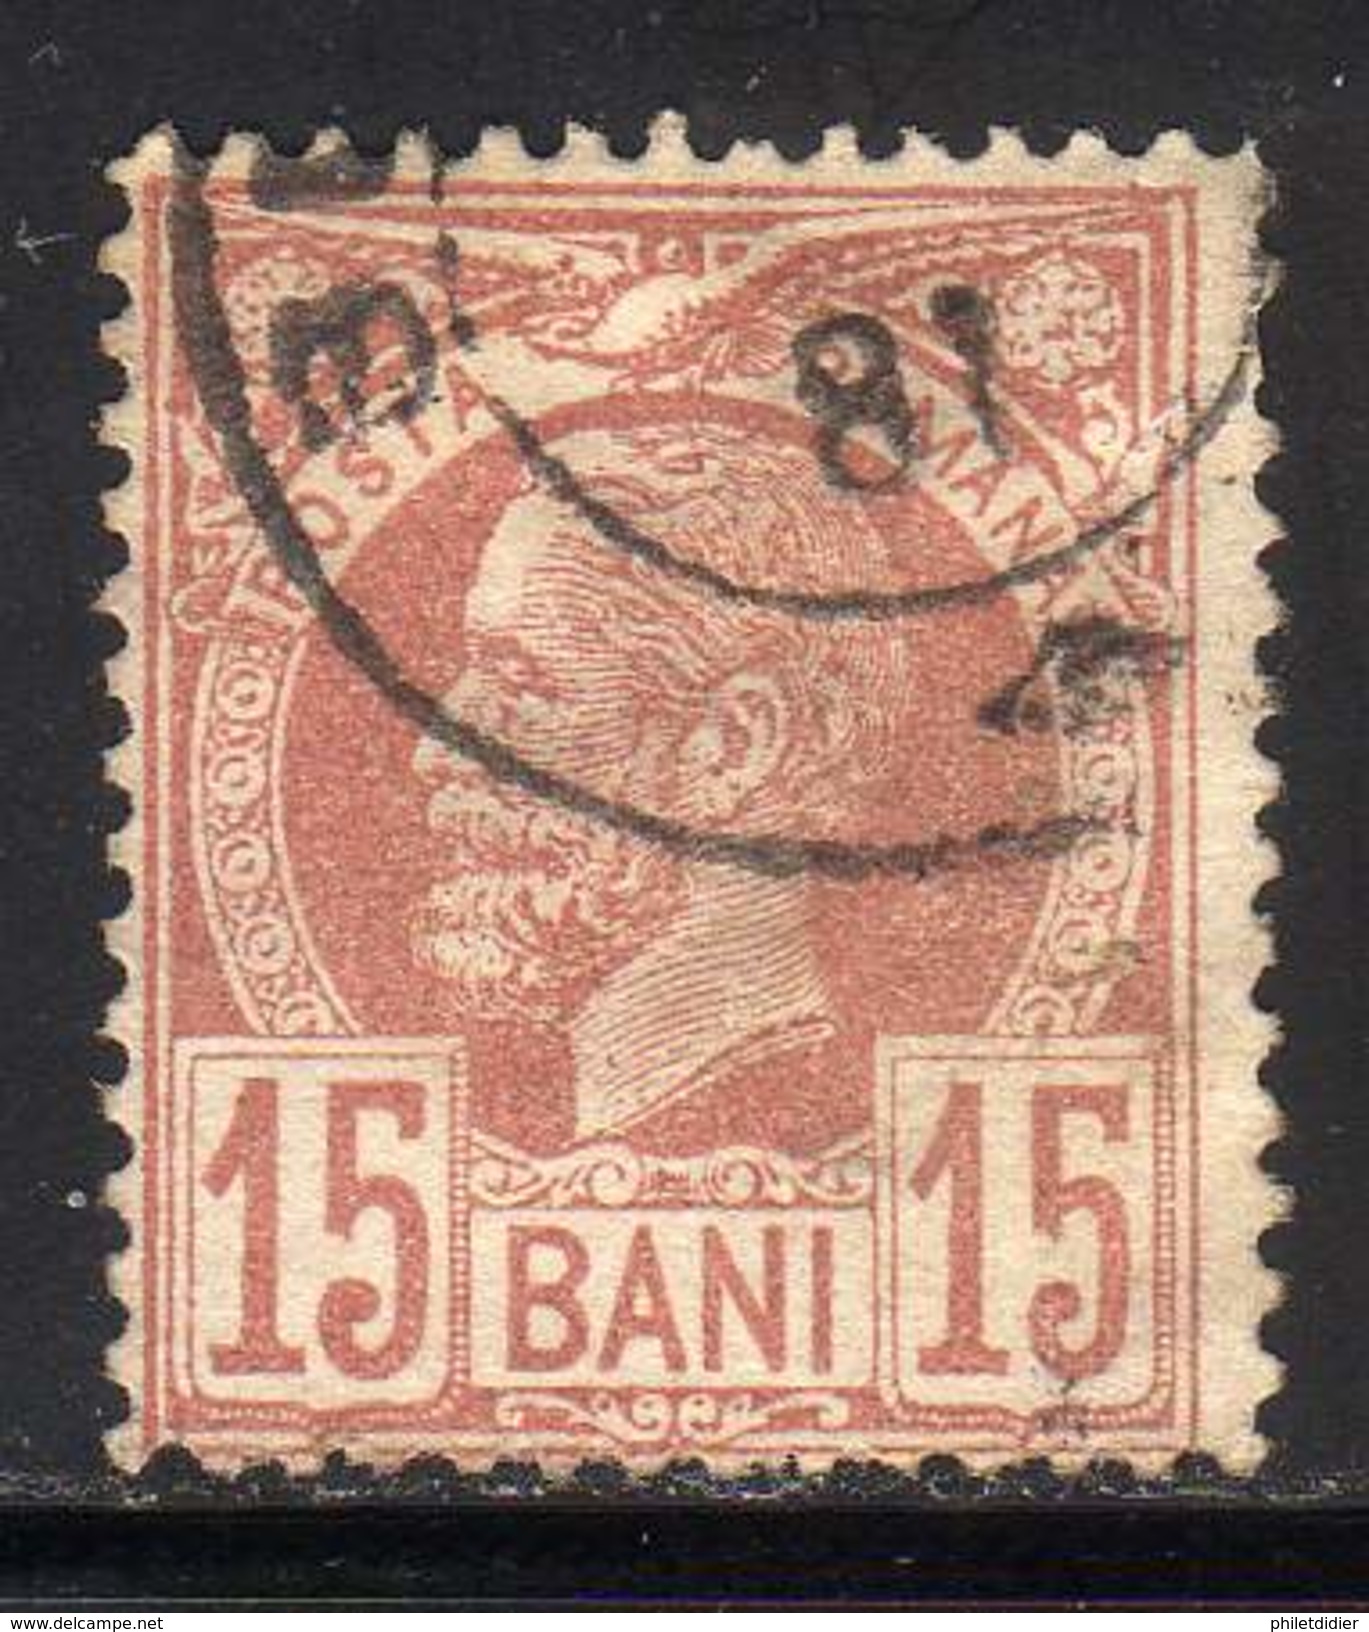 ROUMANIE YT 68 OBLITERE - Used Stamps